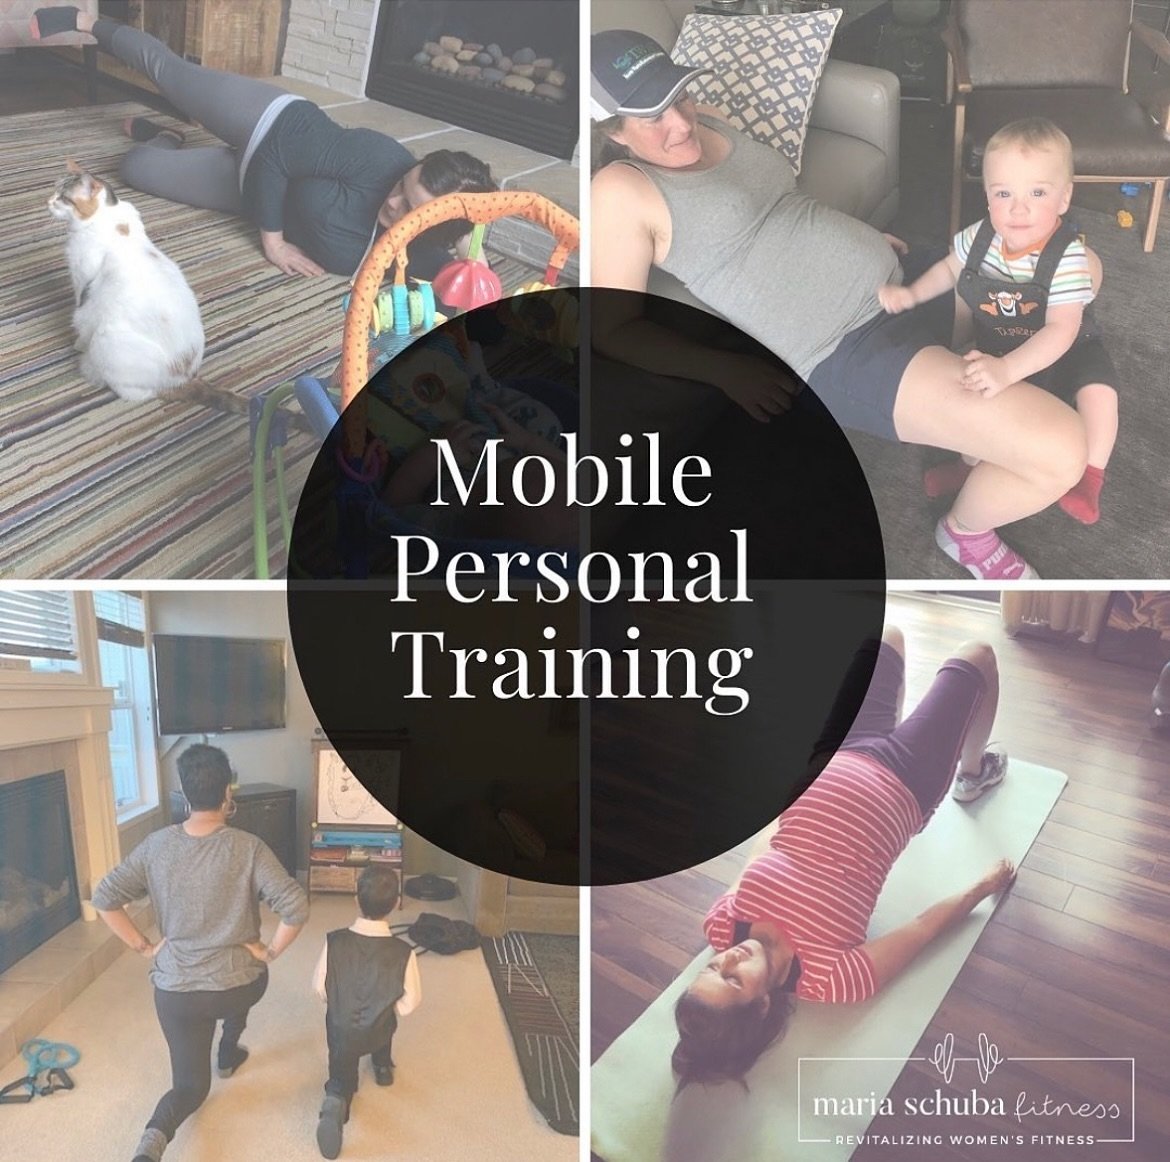 Mobile personal training in south Calgary available! 

✨✨✨✨✨✨

I know it&rsquo;s hard to get out of the house with baby, toddler, diaper bag, snacks, gym stuff, etc. which is why I come to you. You don&rsquo;t need to have much space or equipment. 

